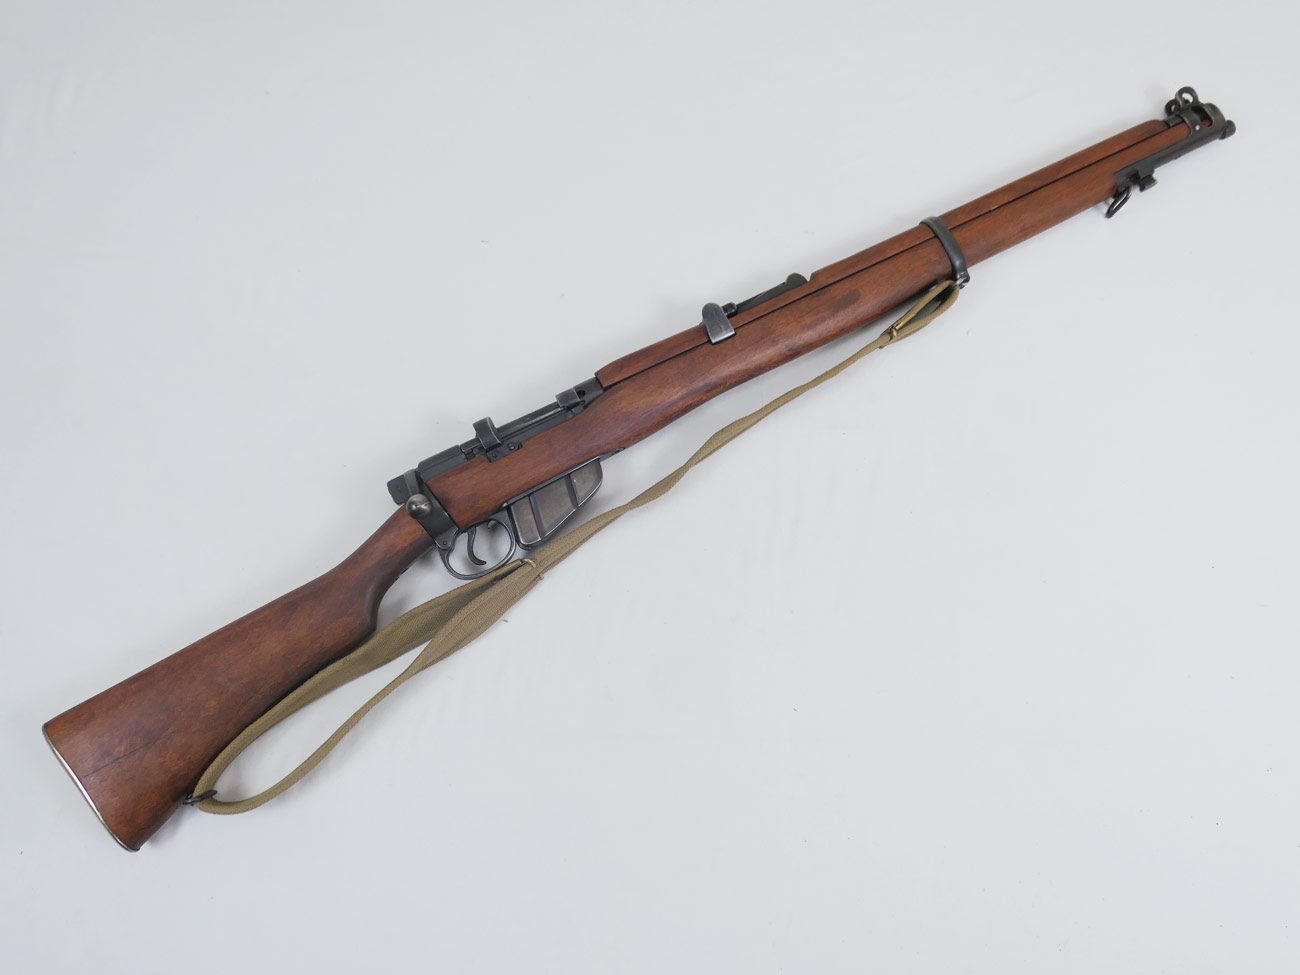 Lee-Enfield Rifle SMLE MK III Deco Model antique film gun with